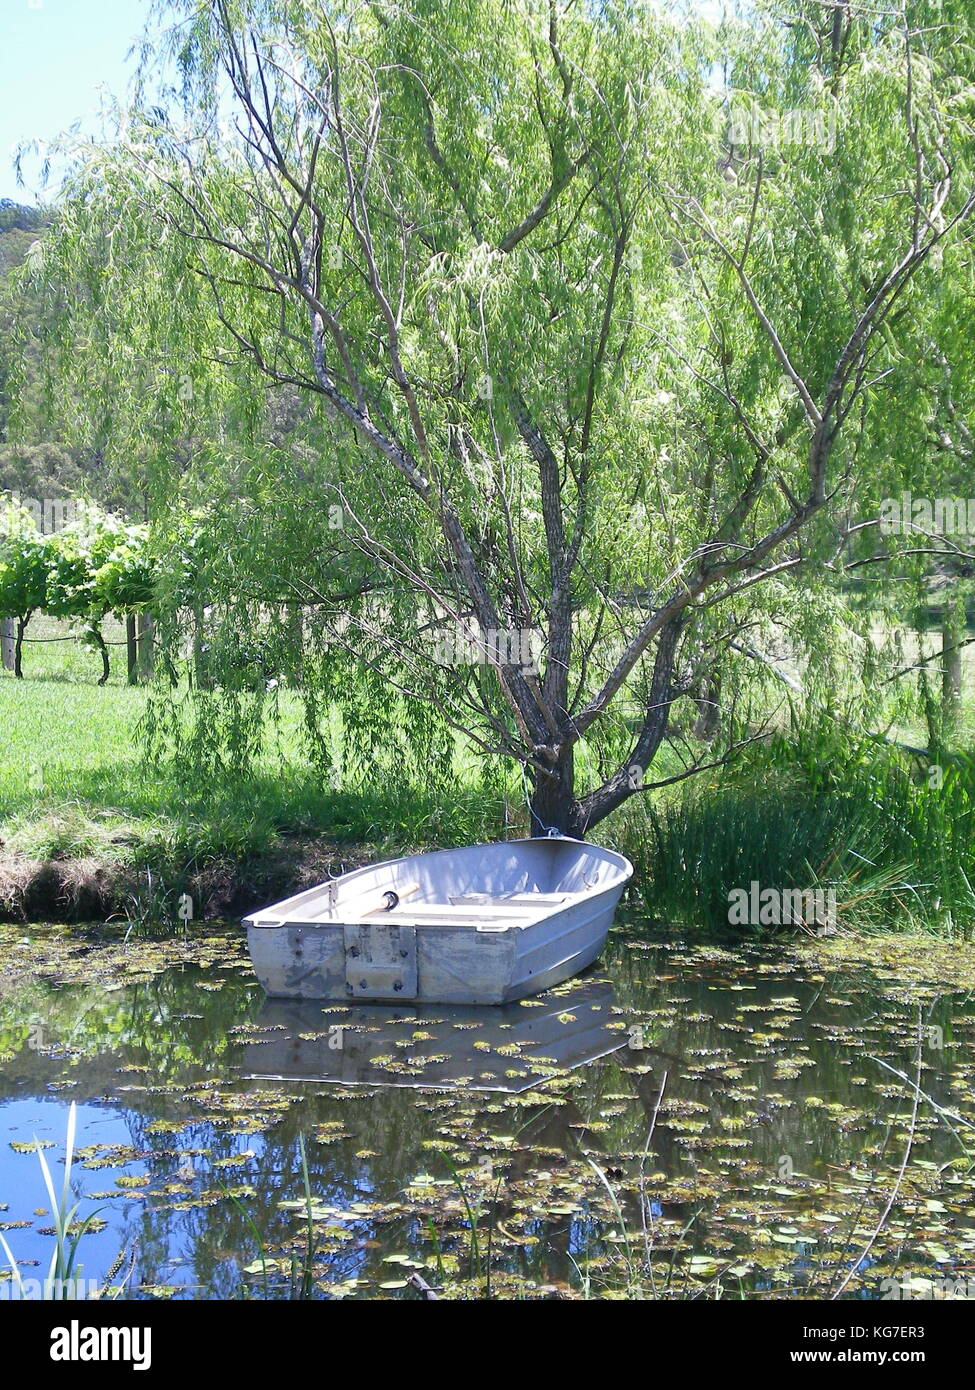 A tin boat on a leaf-covered pond. The boat is tied to a tree. Some grape vines can be seen in the distance, plus tree-covered hills. Stock Photo